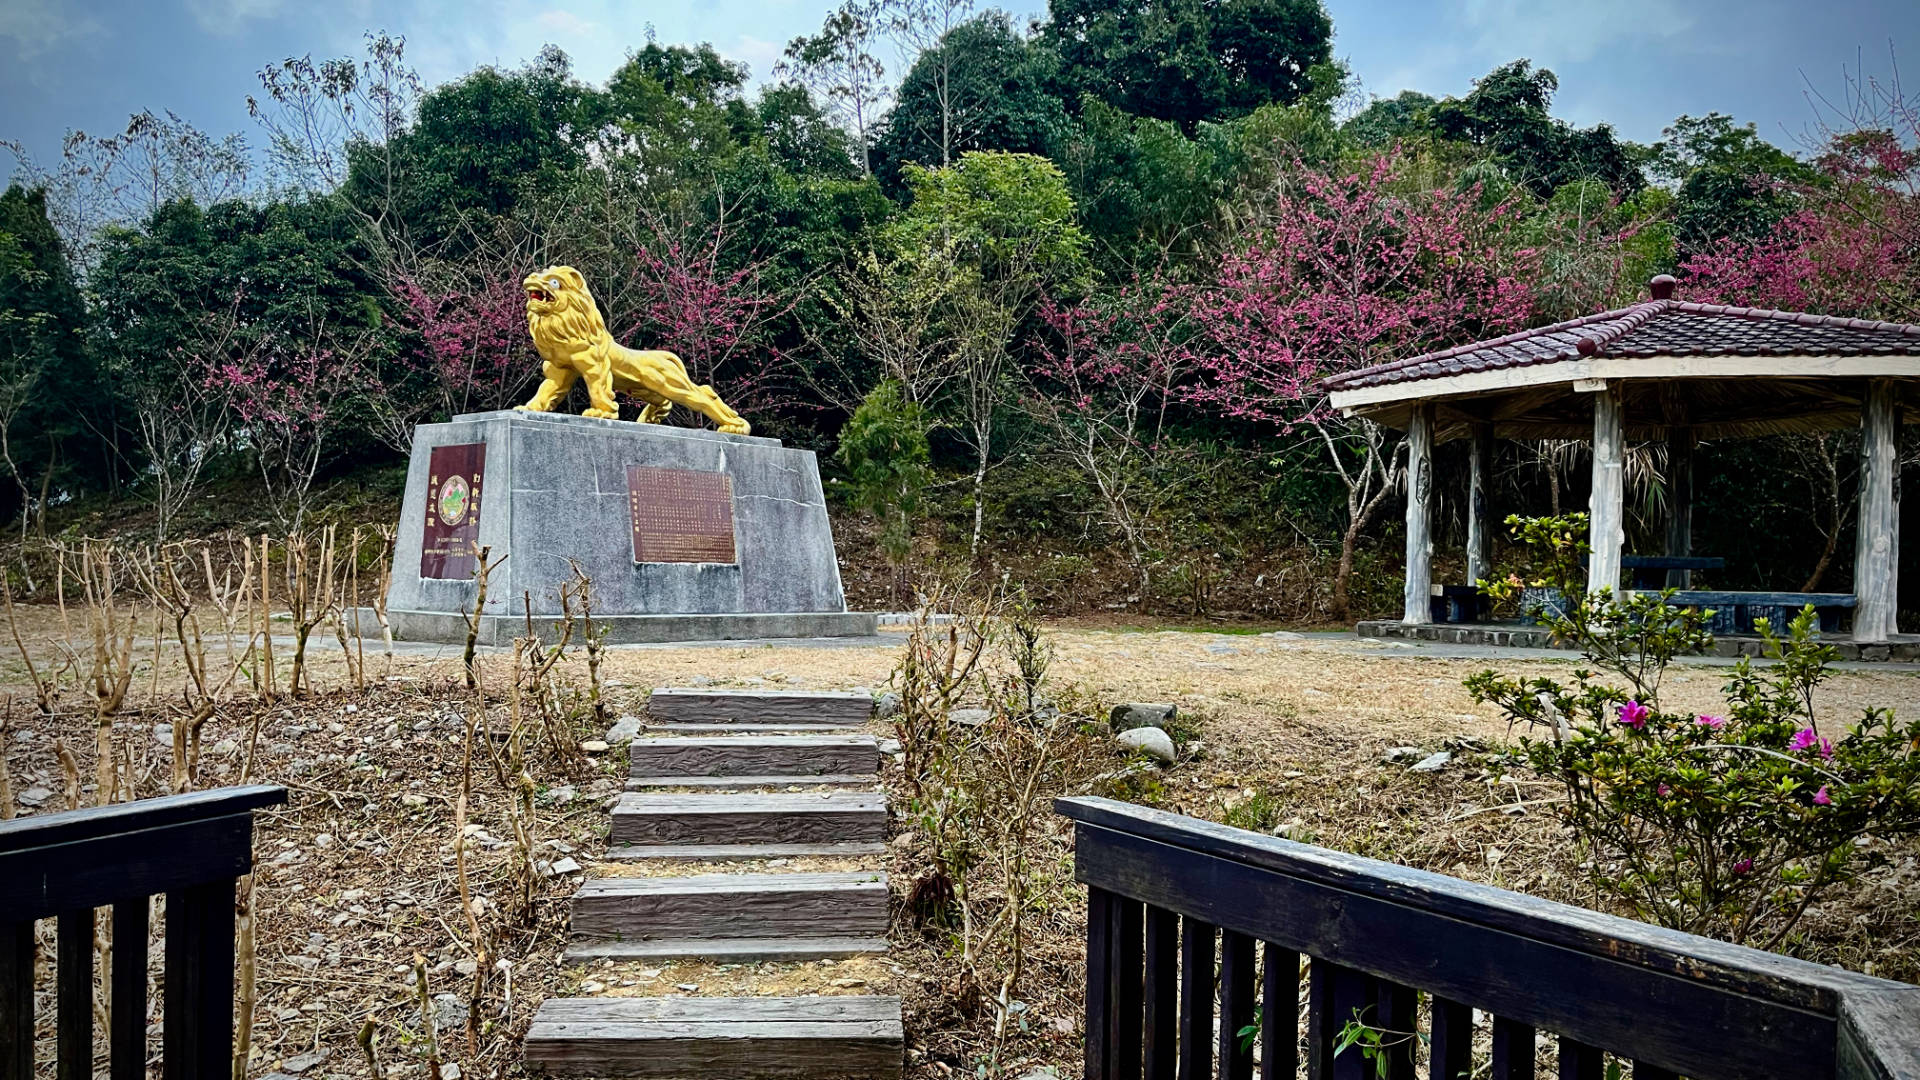 Steps leading up to a lion statue, about 1 meter tall, atop a 1.5 meter tall gray concrete base, with a gazebo behind it.